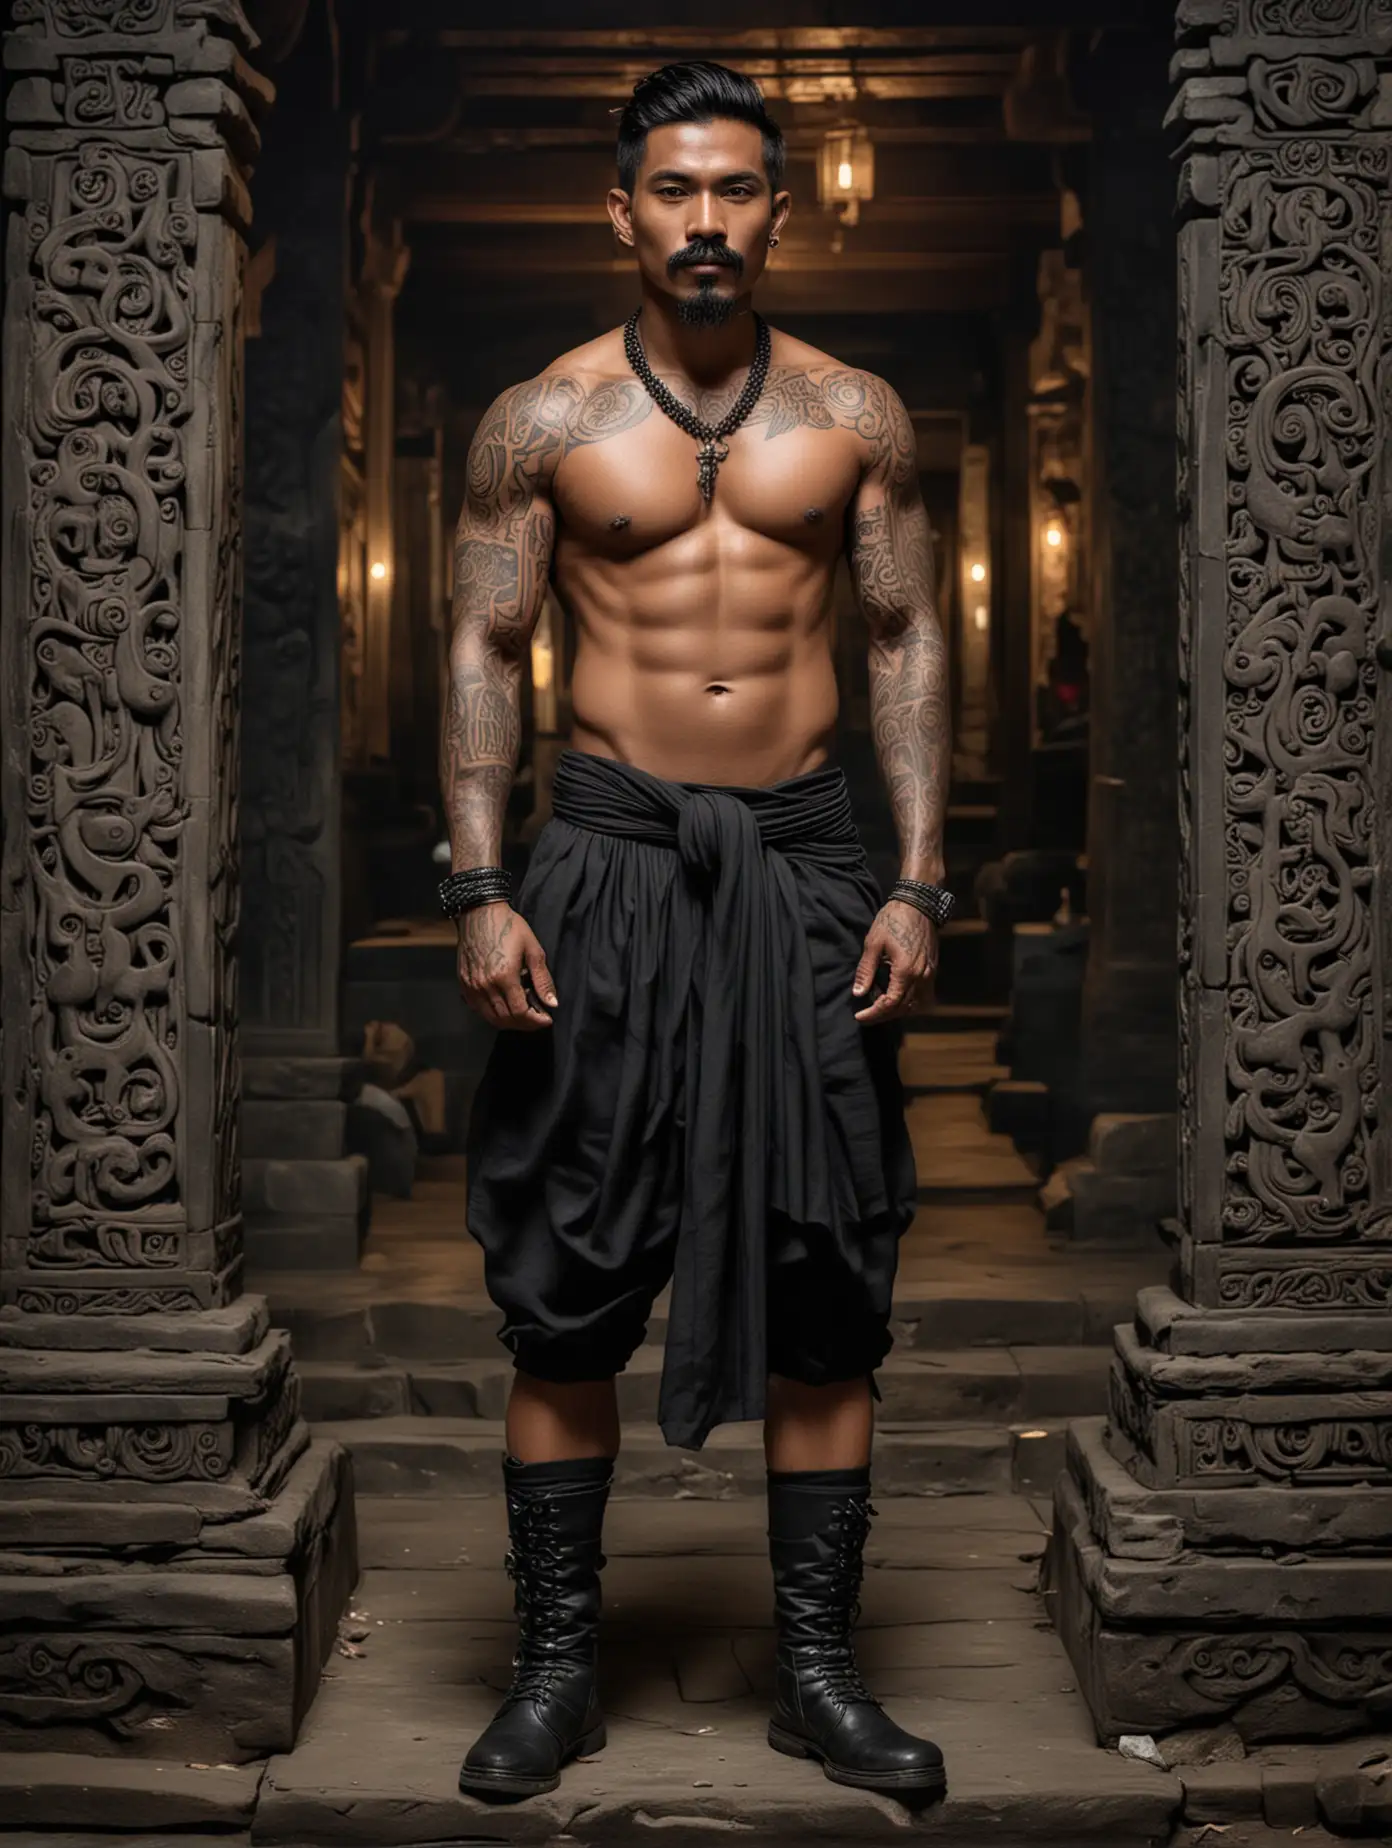 Muscular-Indonesian-Man-with-Tattoos-Standing-in-Ancient-Temple-at-Night